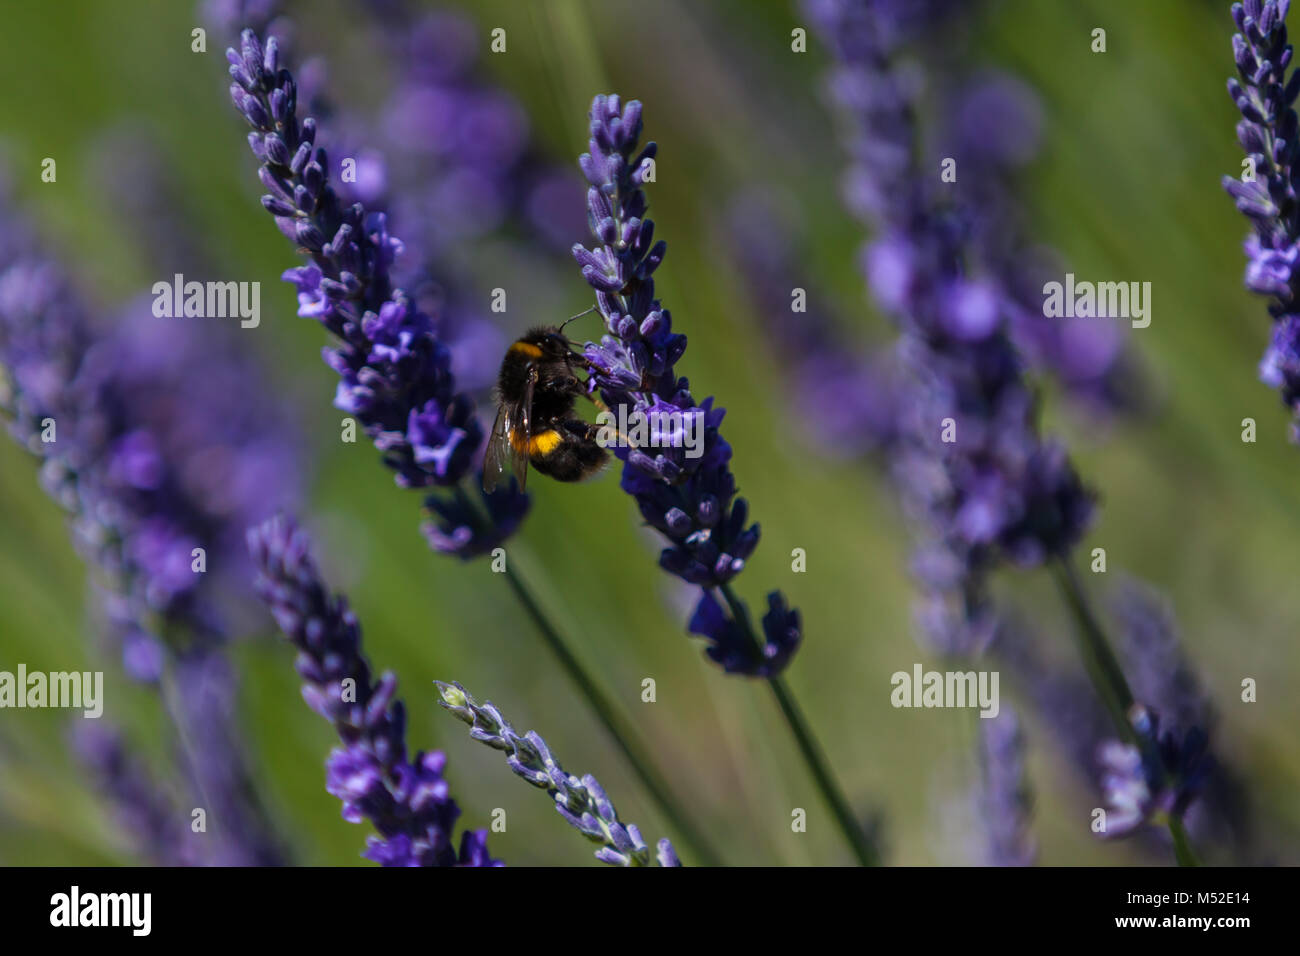 Lavender Field Provence Bee Close Up Bokeh Blurred Stock Photo